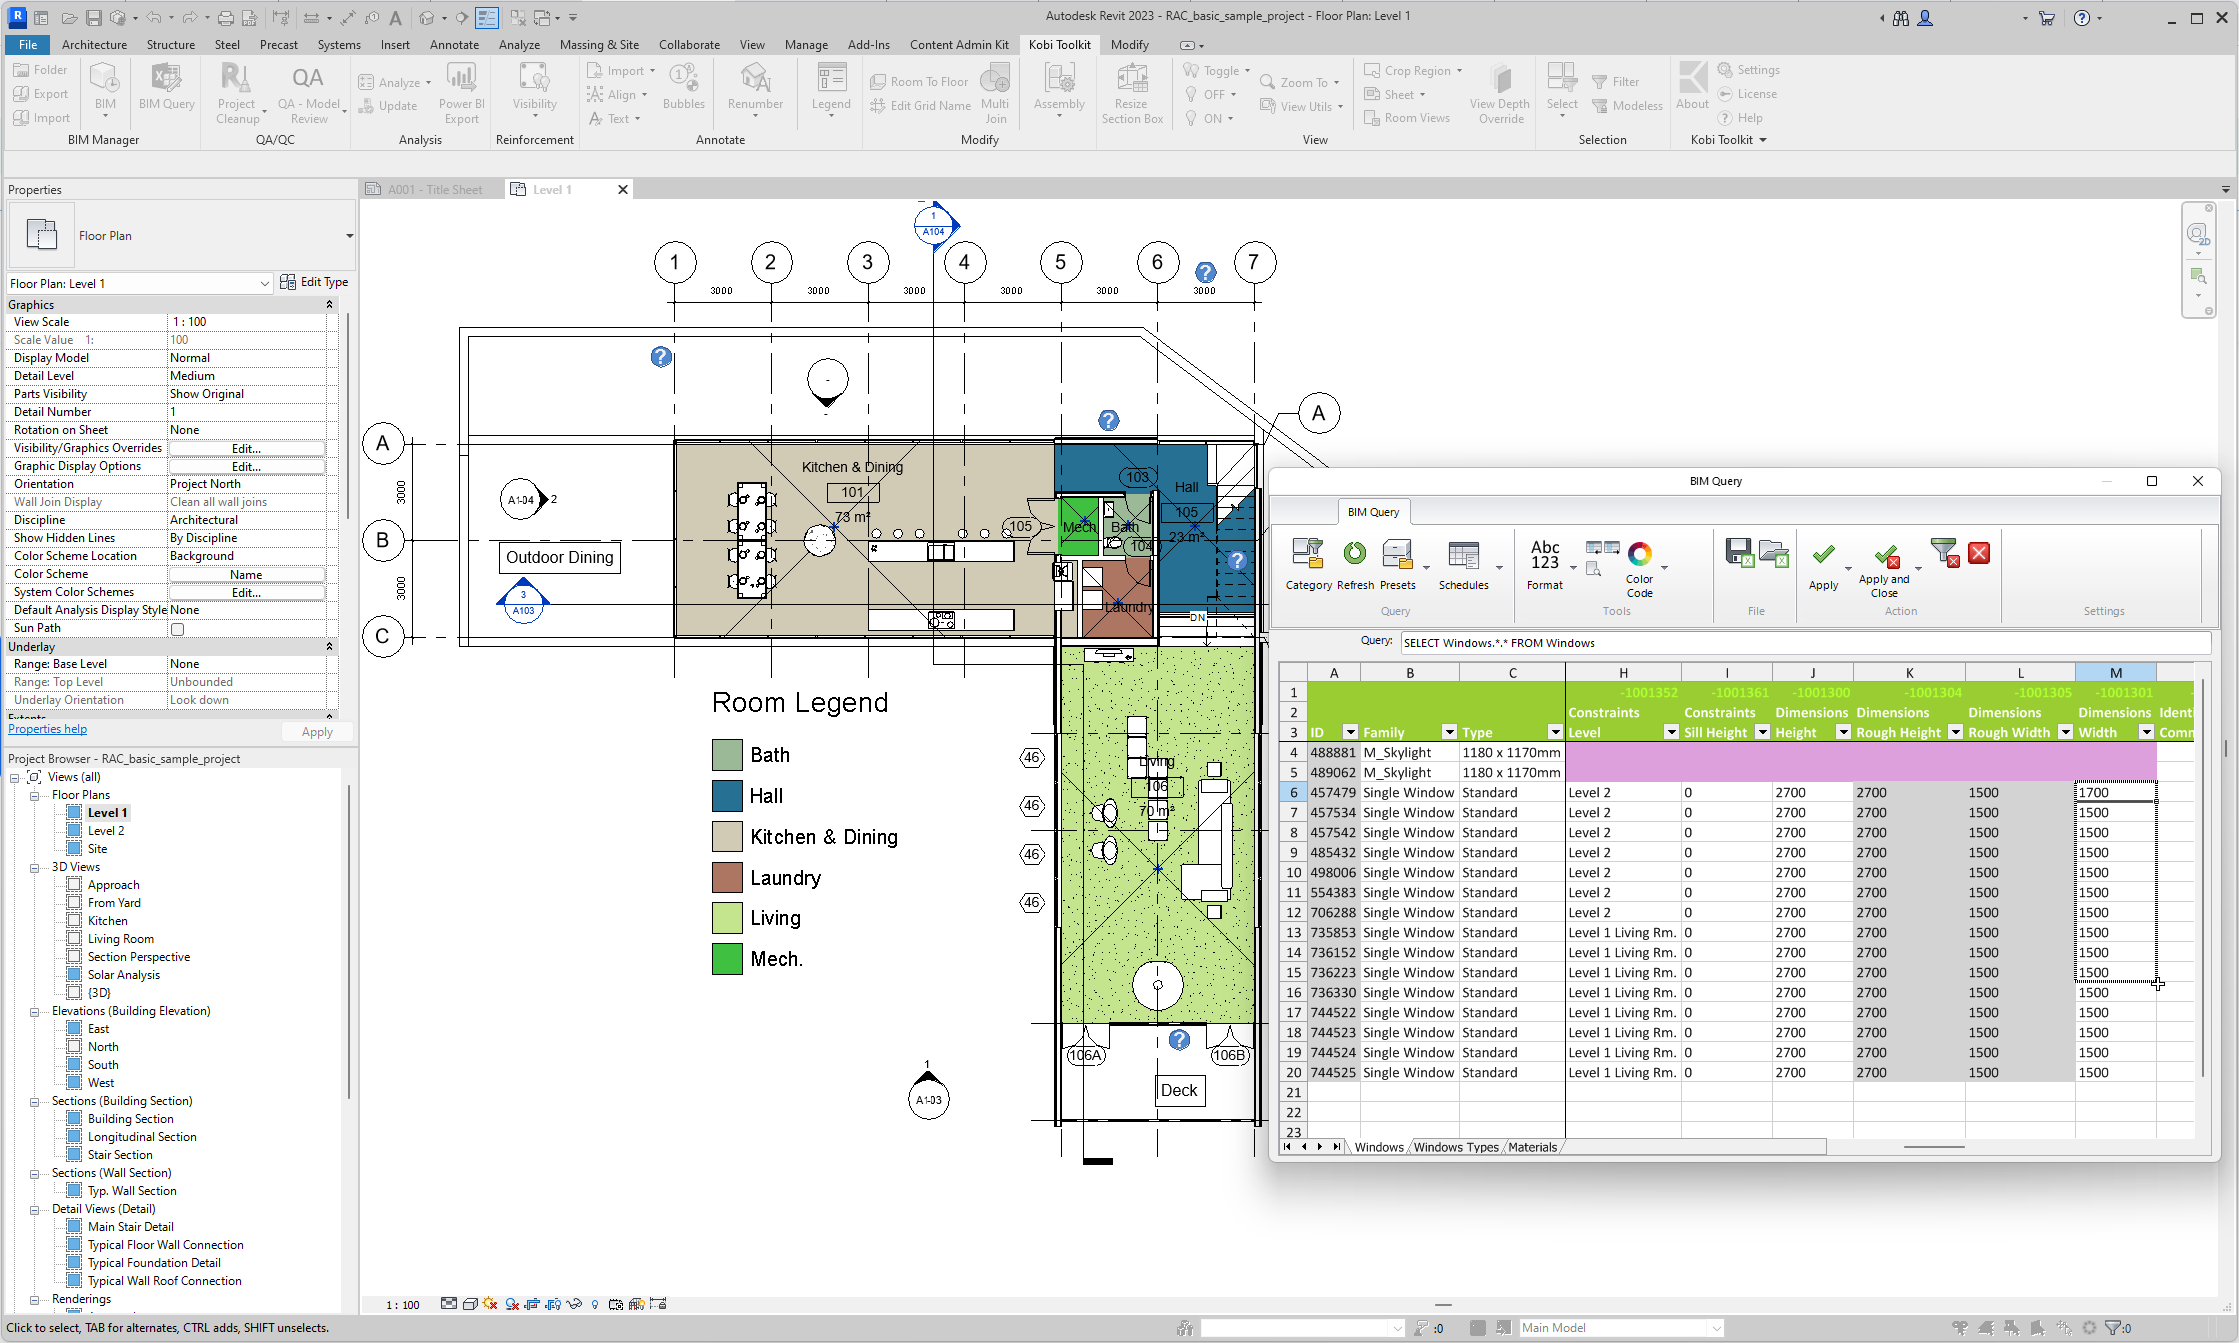 BIM Query streamlines property management in your Revit model. It lets you quickly edit Type and Instance properties of selected Categories using the built-in spreadsheet editor, with Excel functionalities like sorting, filtering, and copying parameters.